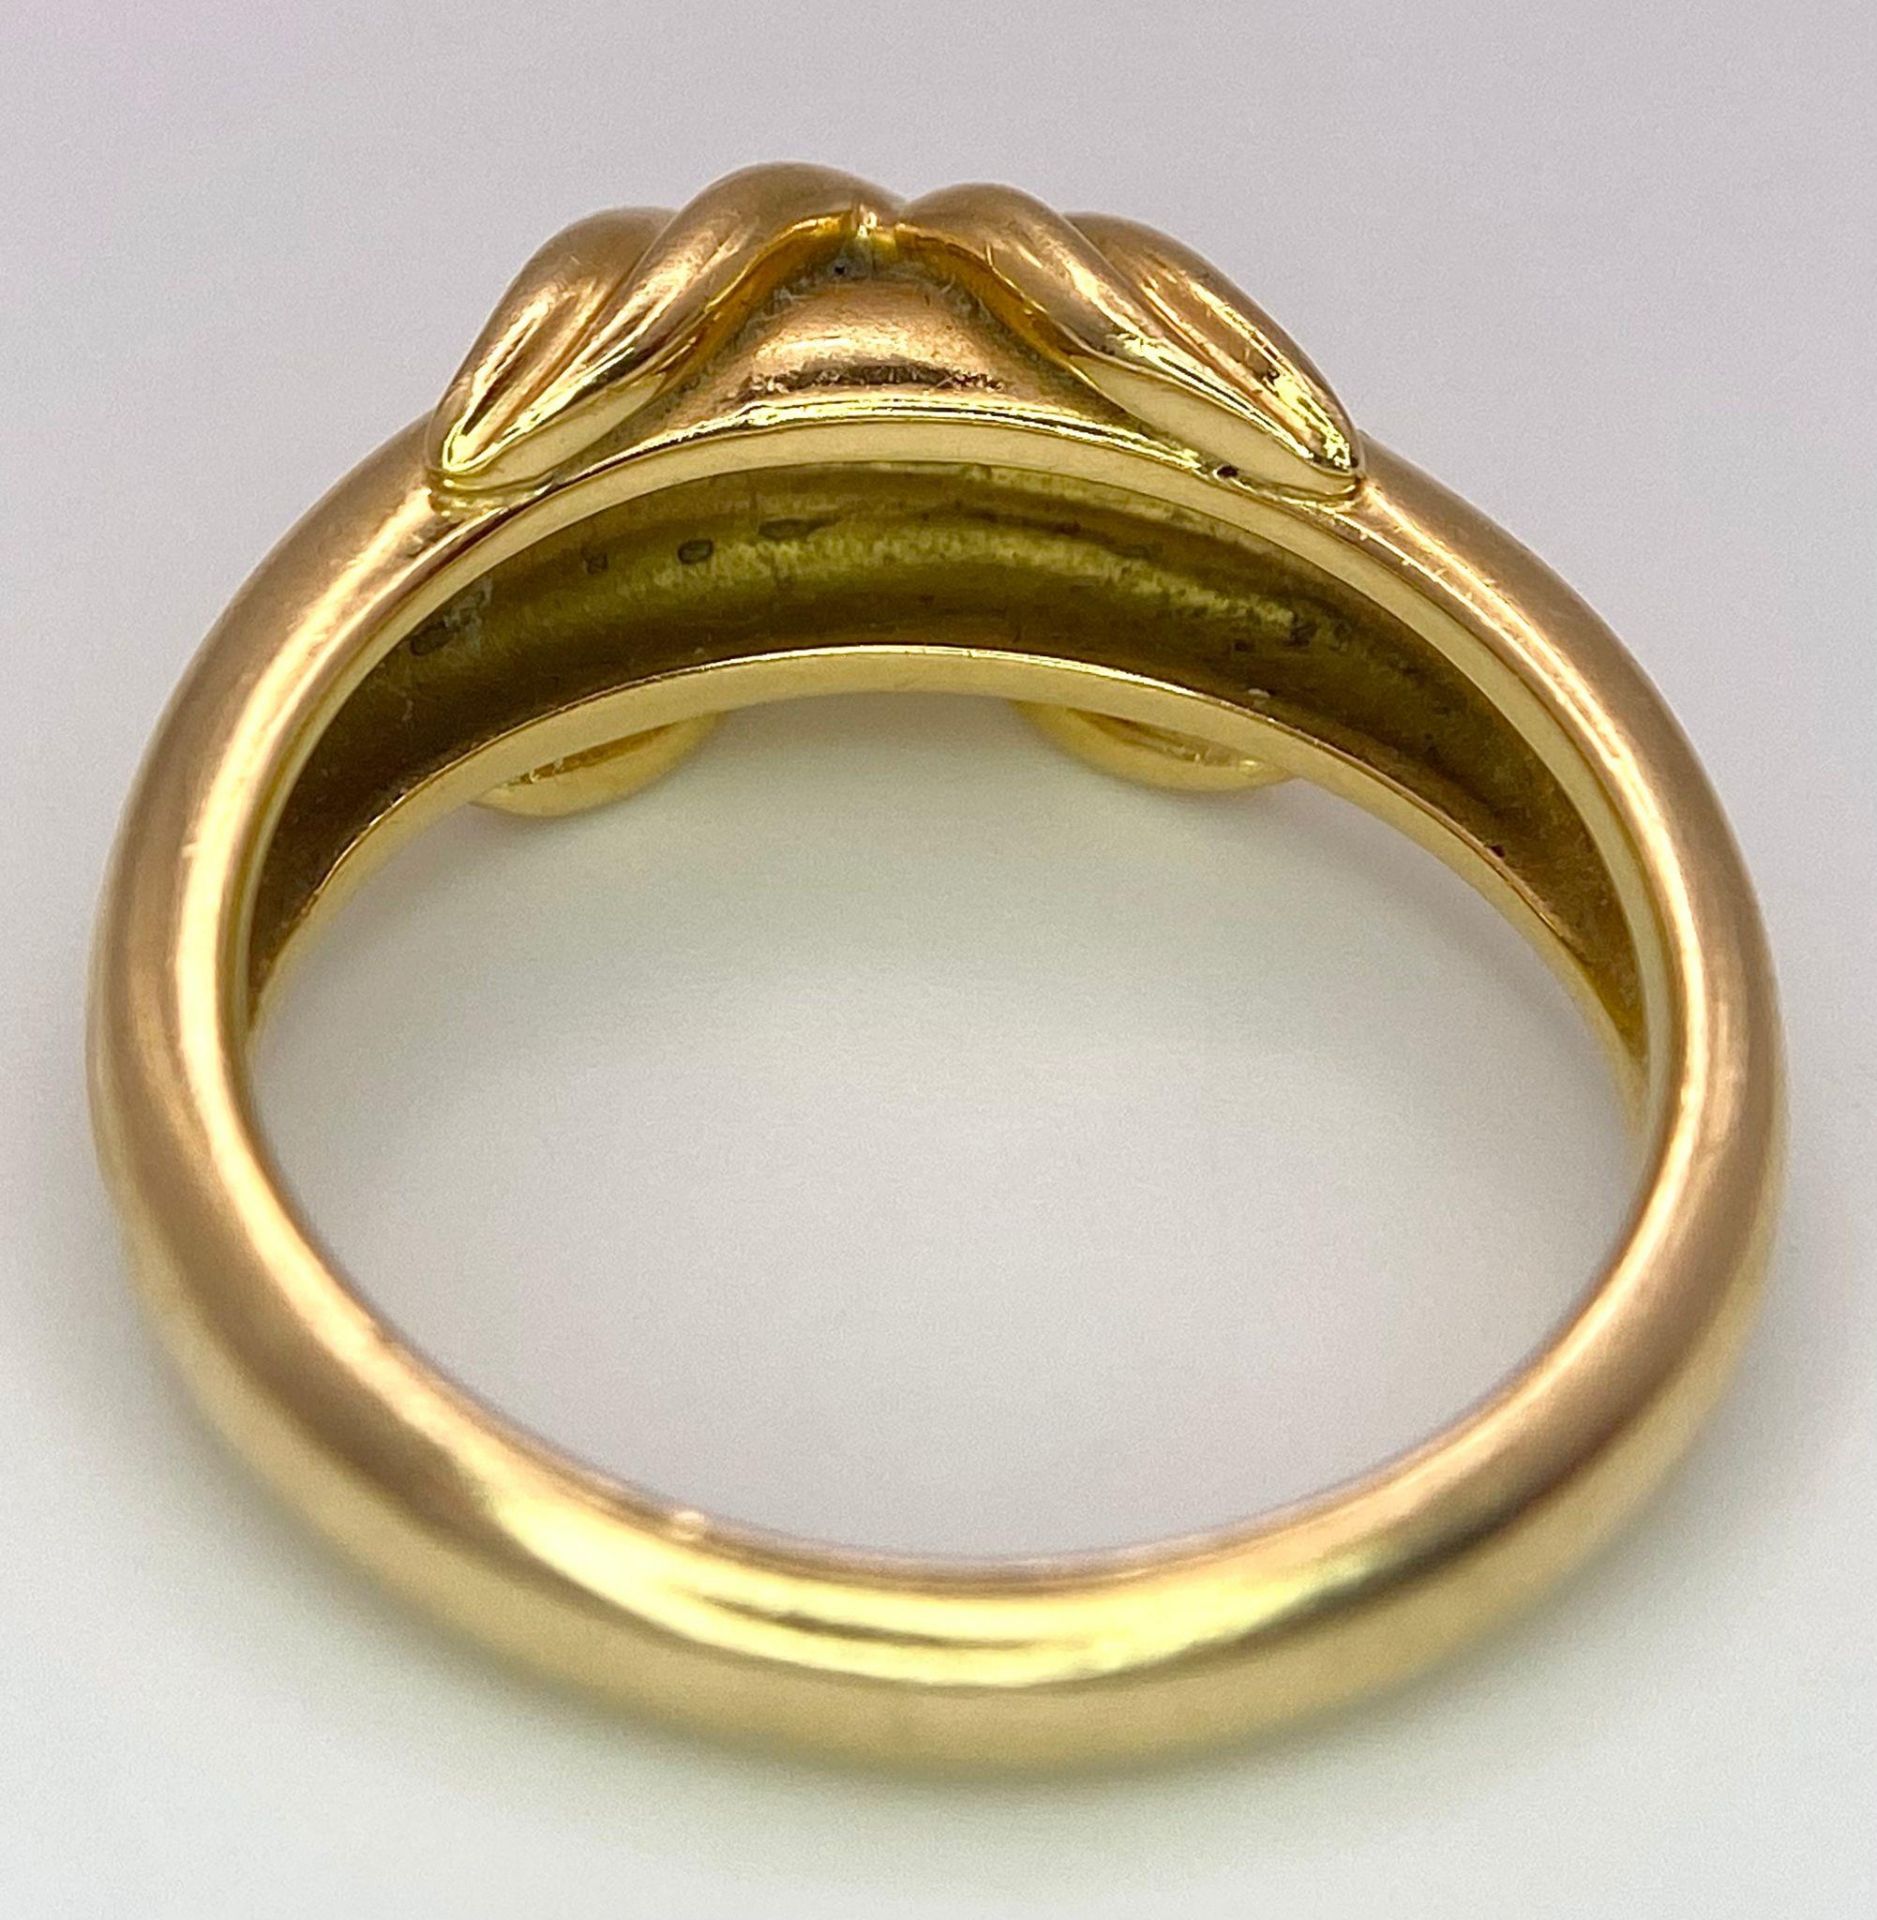 A Beautiful Tiffany and Co. 18K Gold Love Ring. Tiffany and co. markings. Size N. 7.2g weight. - Image 7 of 10